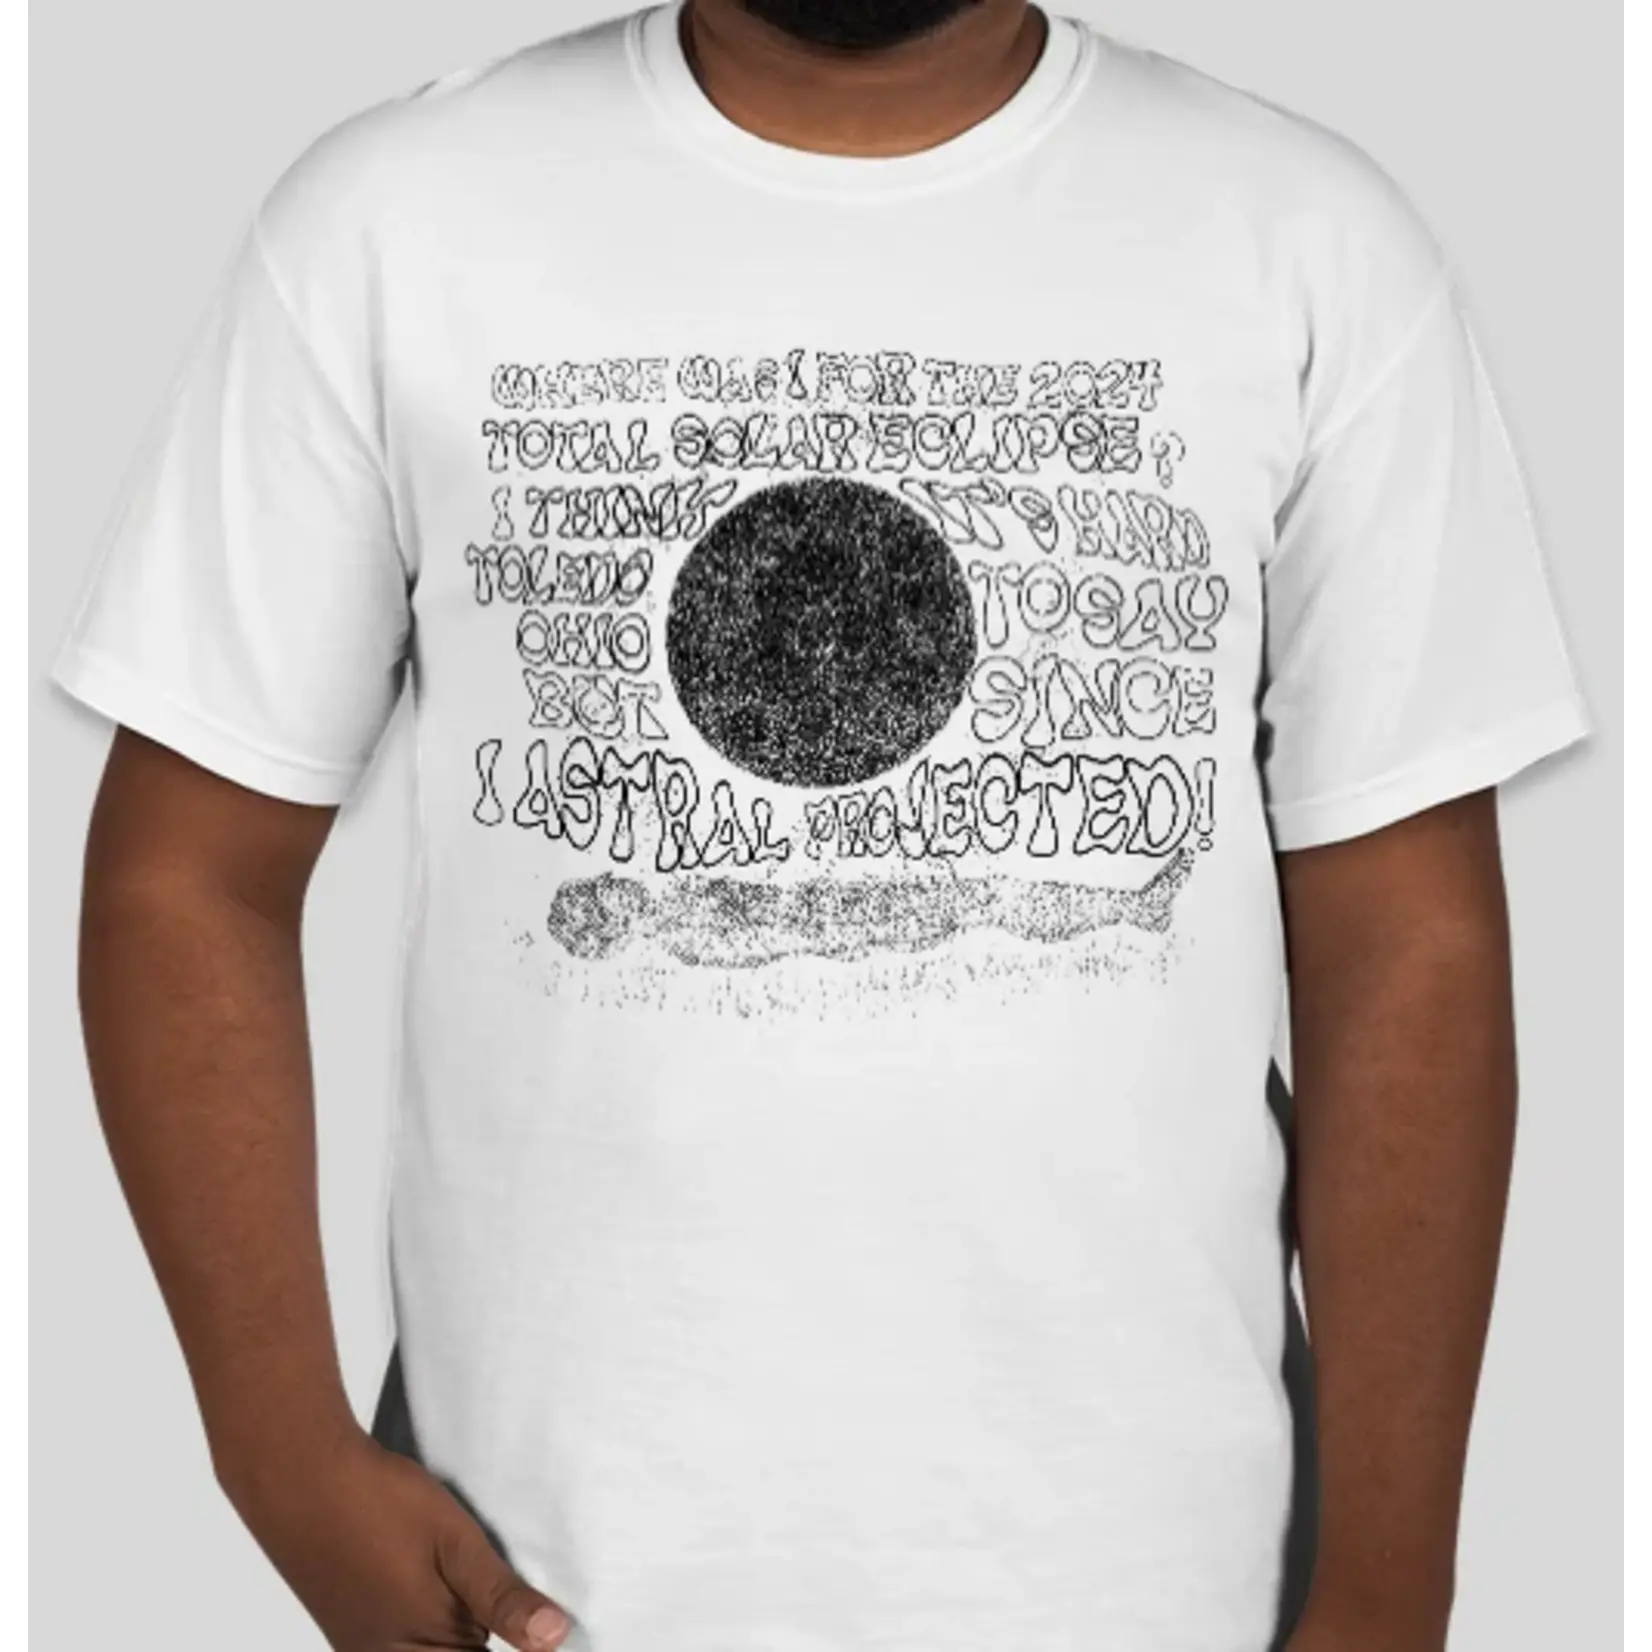 Culture Clash Exclusive Erin Keaton Eclipse Astral Projection T-Shirt